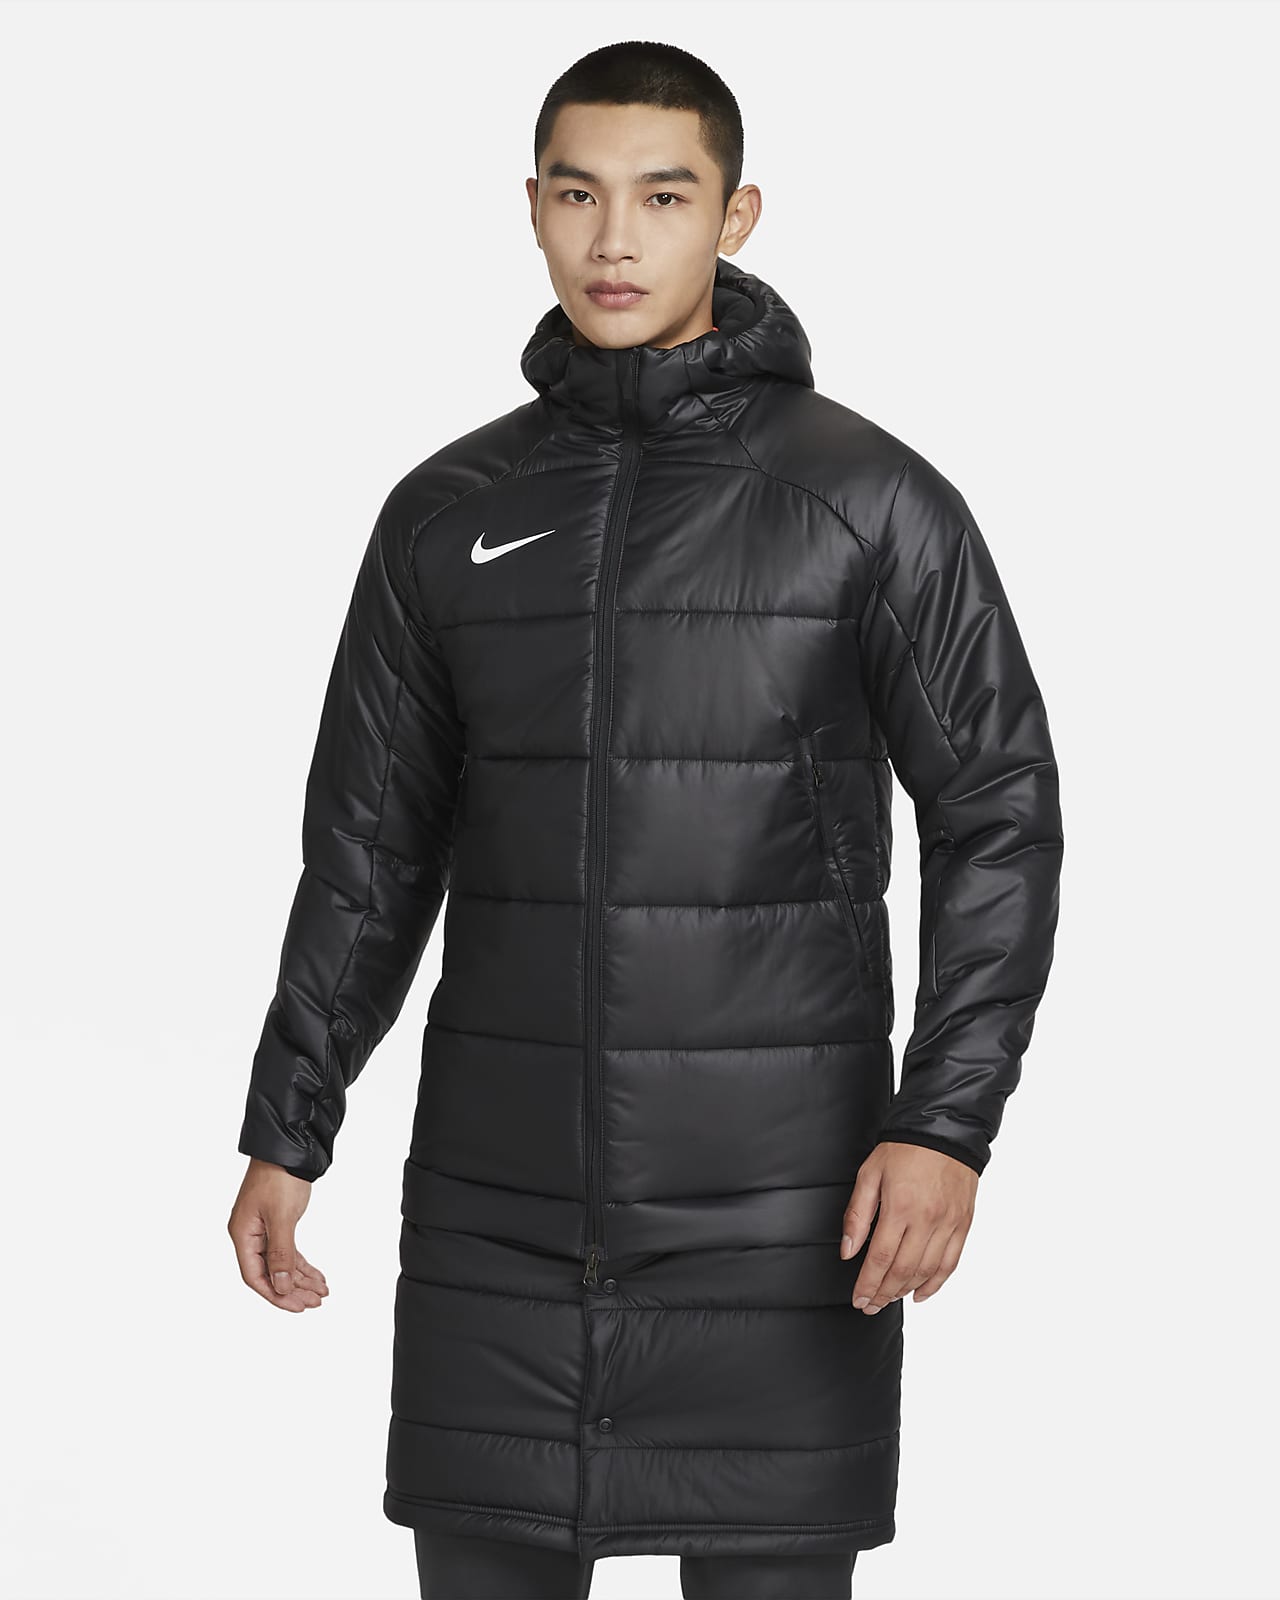 Nike Therma-FIT Academy Pro Men's 2-in-1 Insulated Soccer Jacket